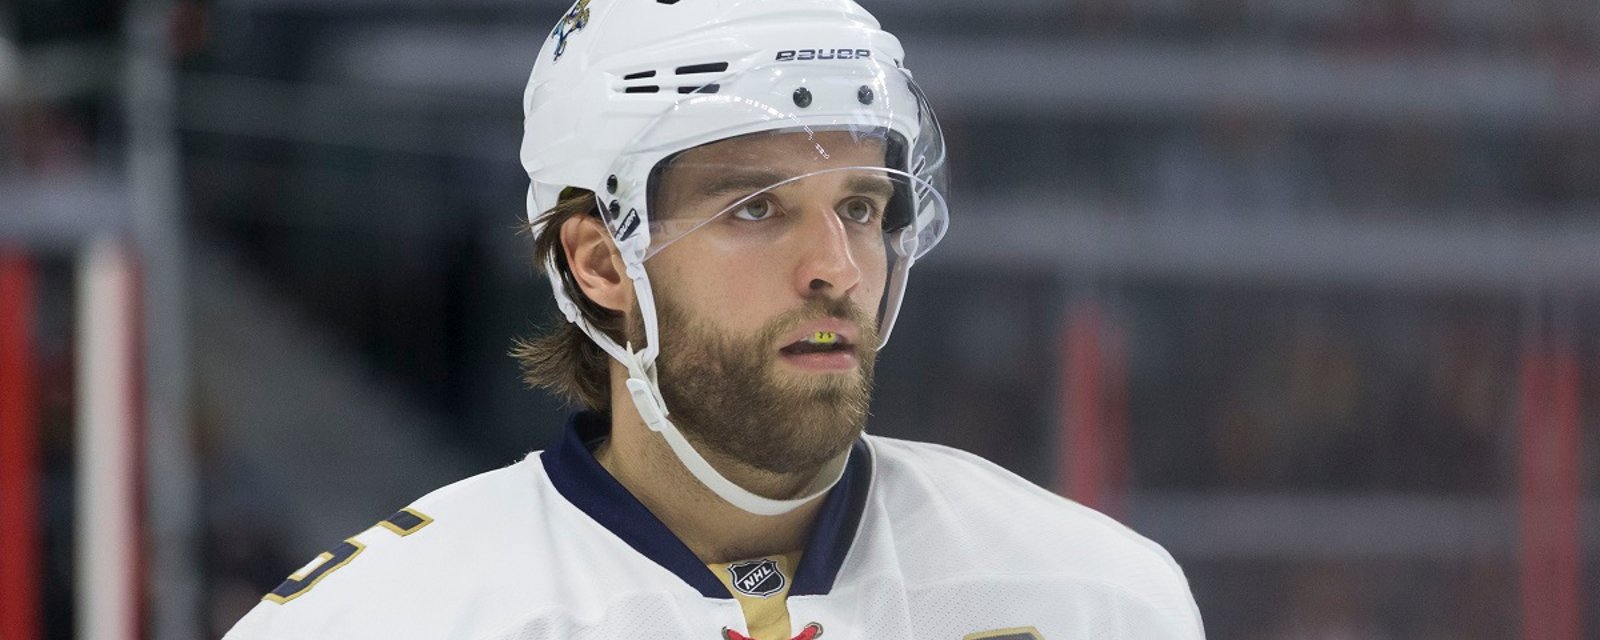 NHL star sends powerful message to closeted gay hockey players.